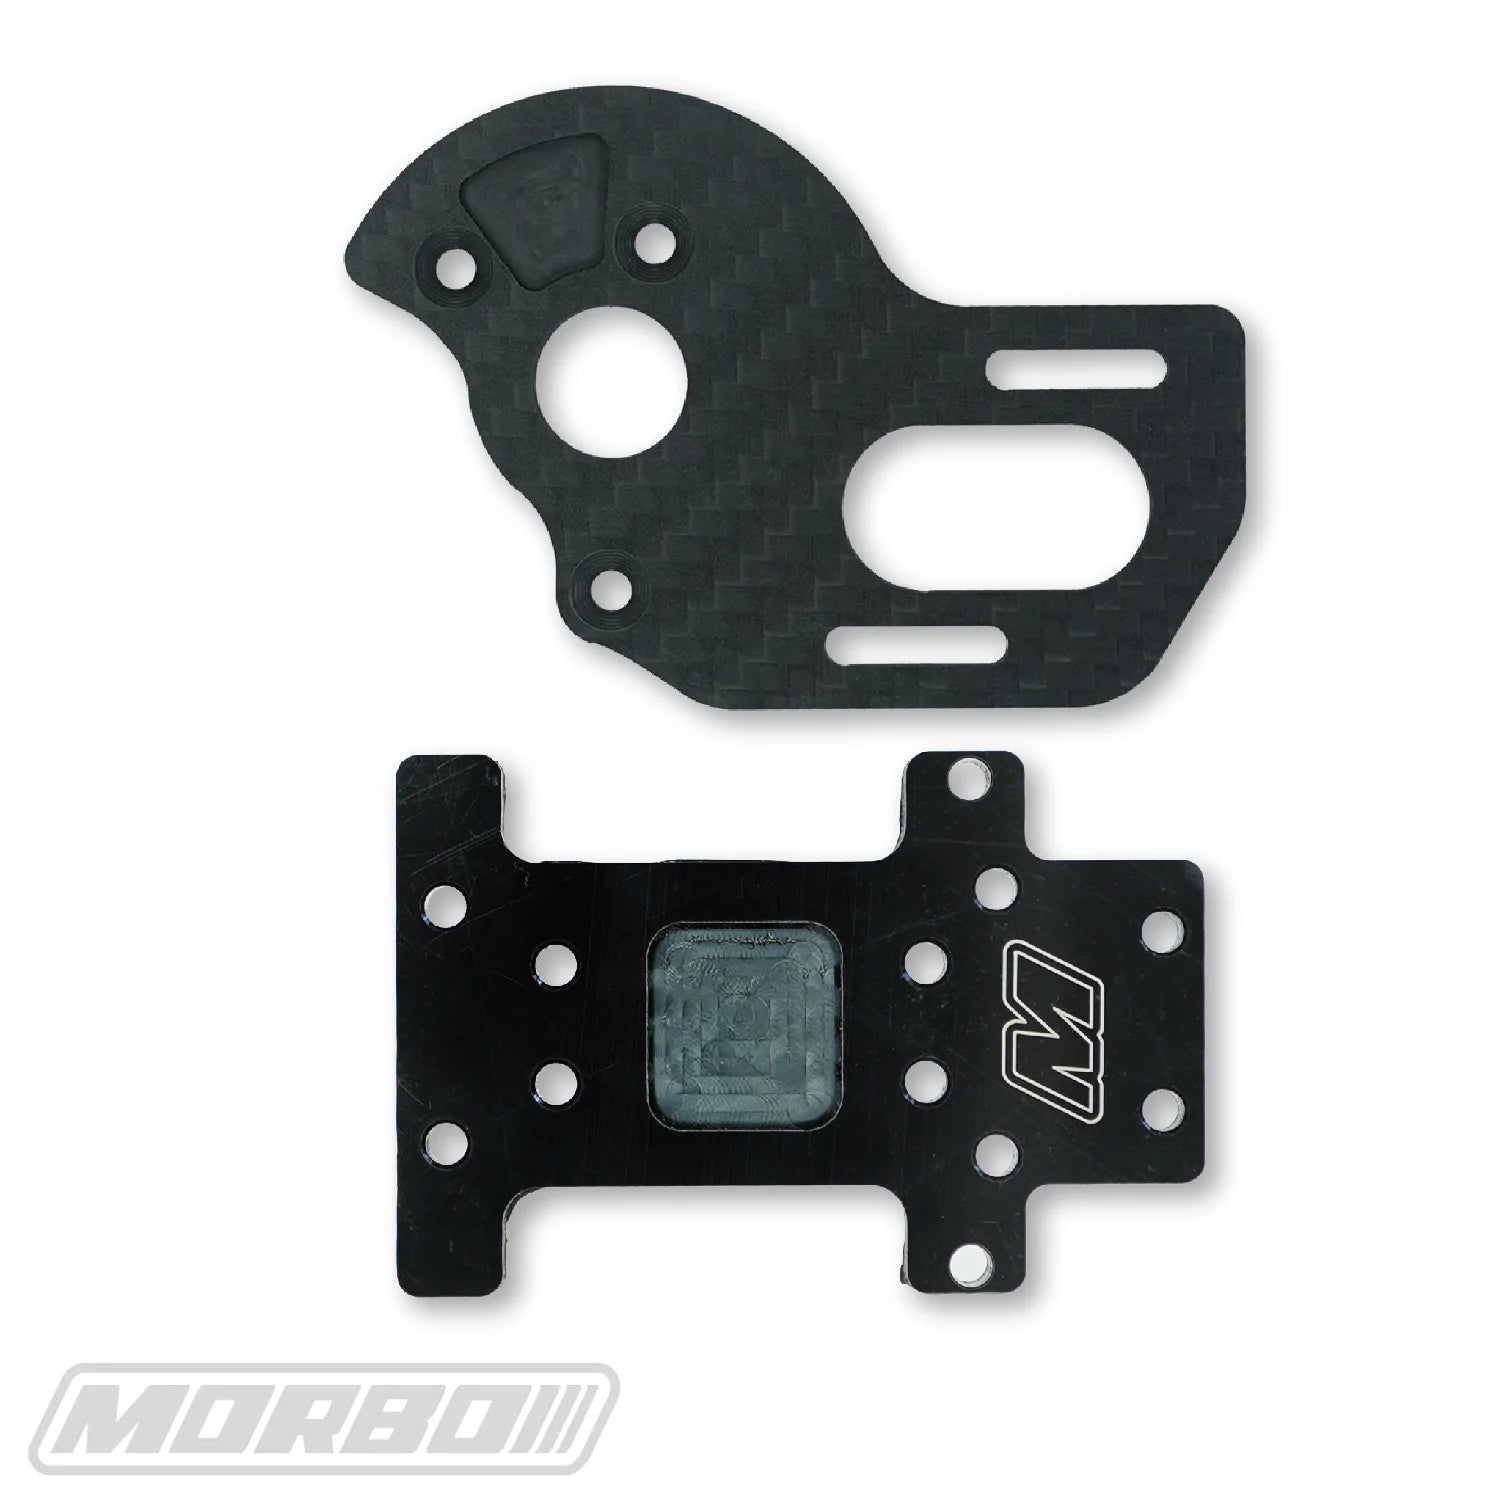 MORBO B6.1 - B6.3 LAYDOWN 6MM TRANS SPACER AND XL MOTOR MOUNT